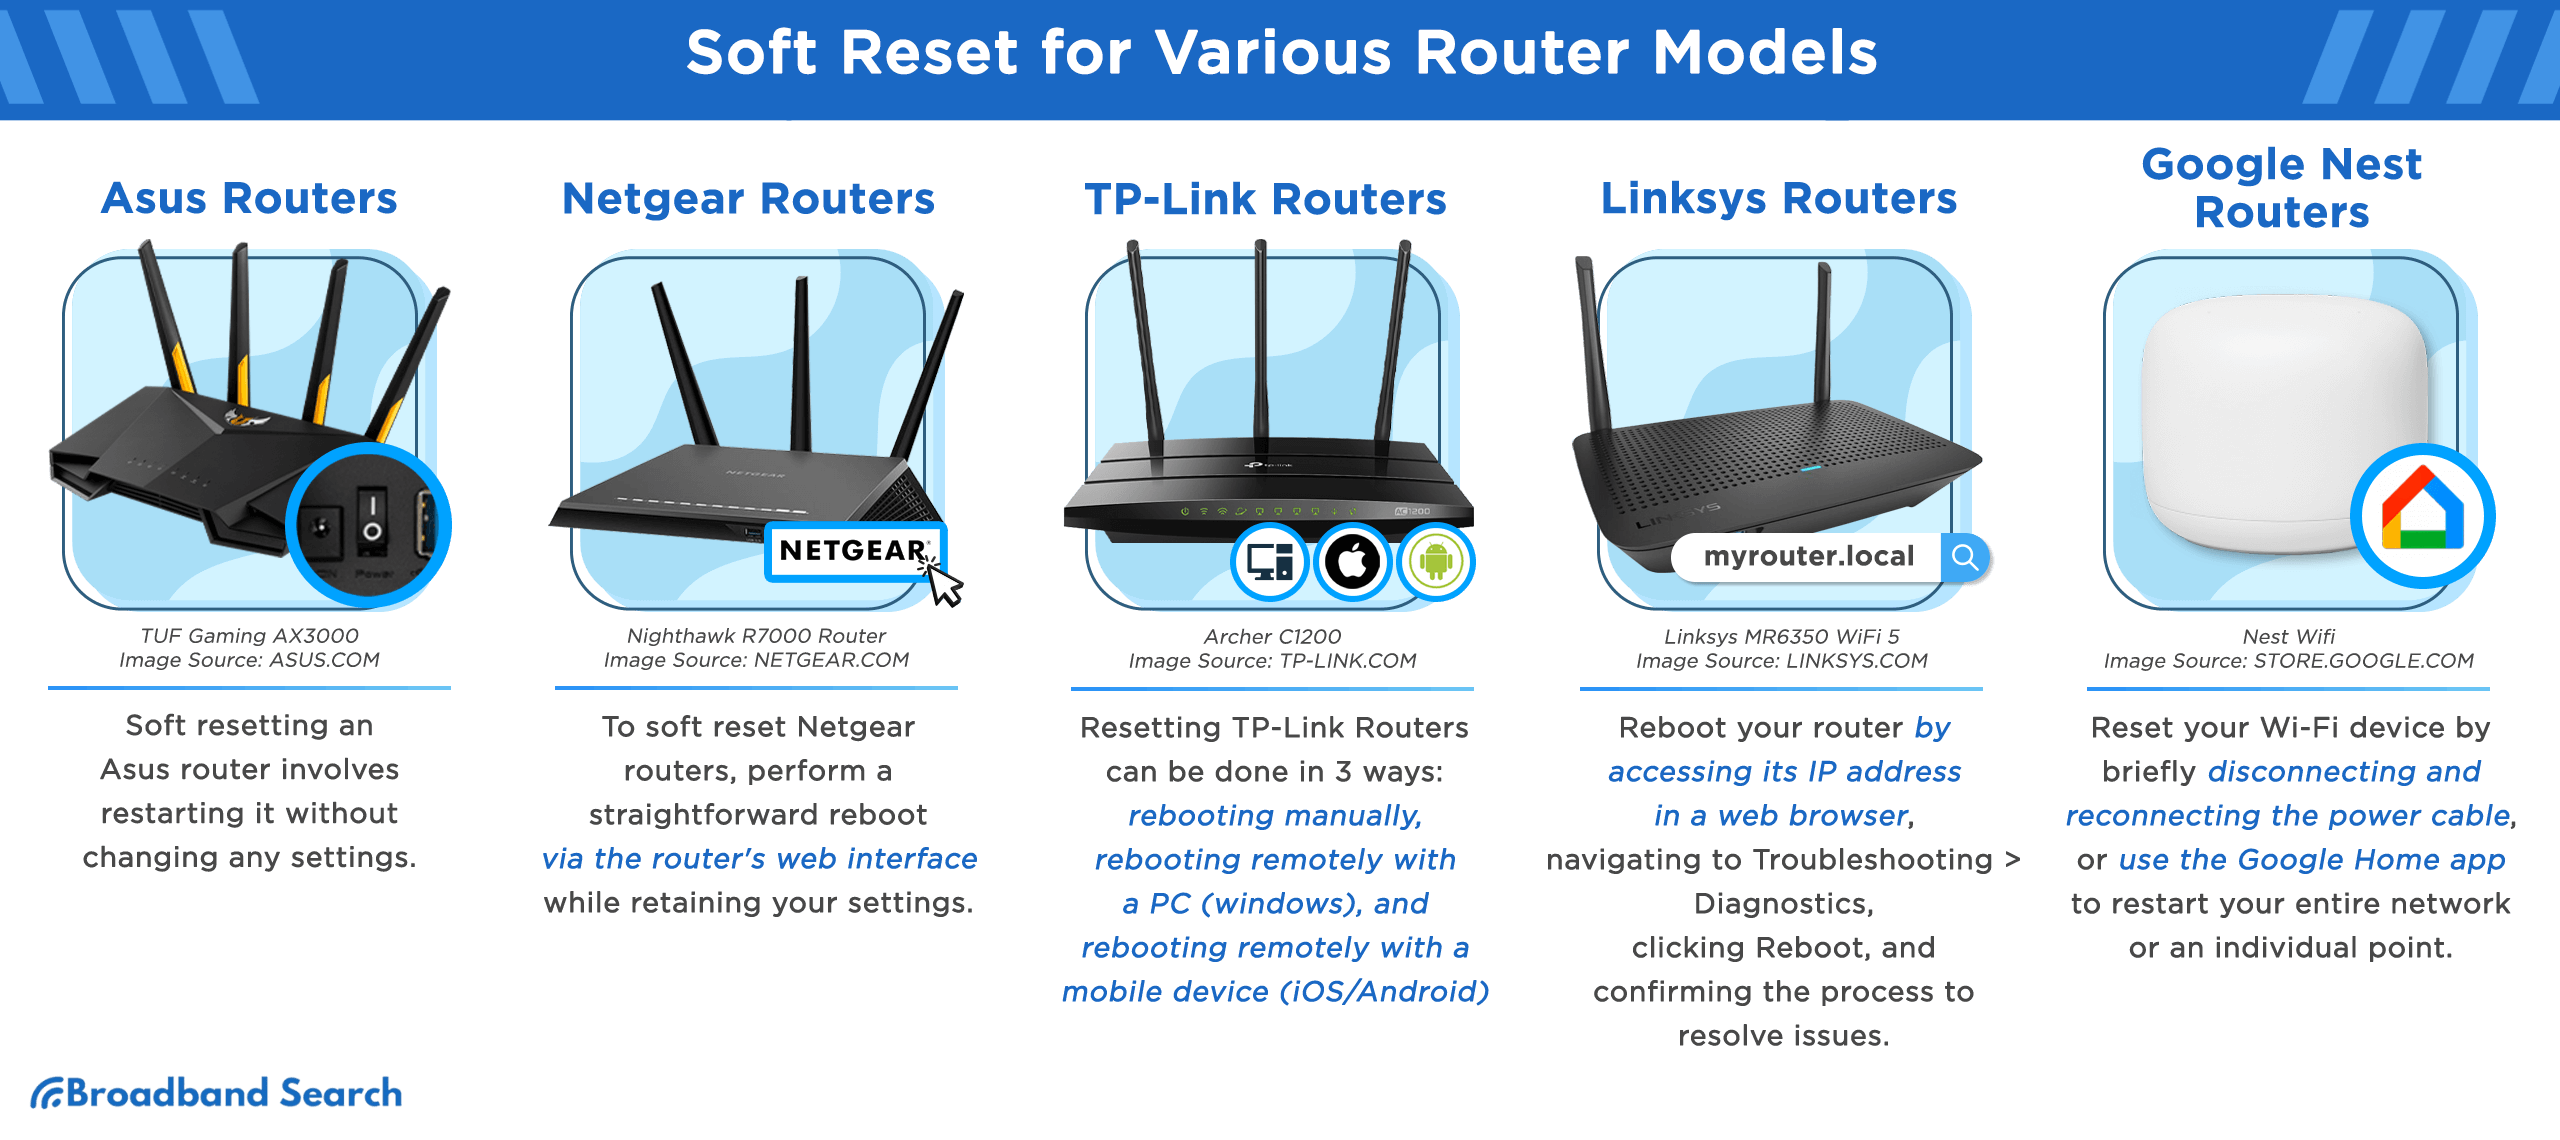 Soft reset for various router models